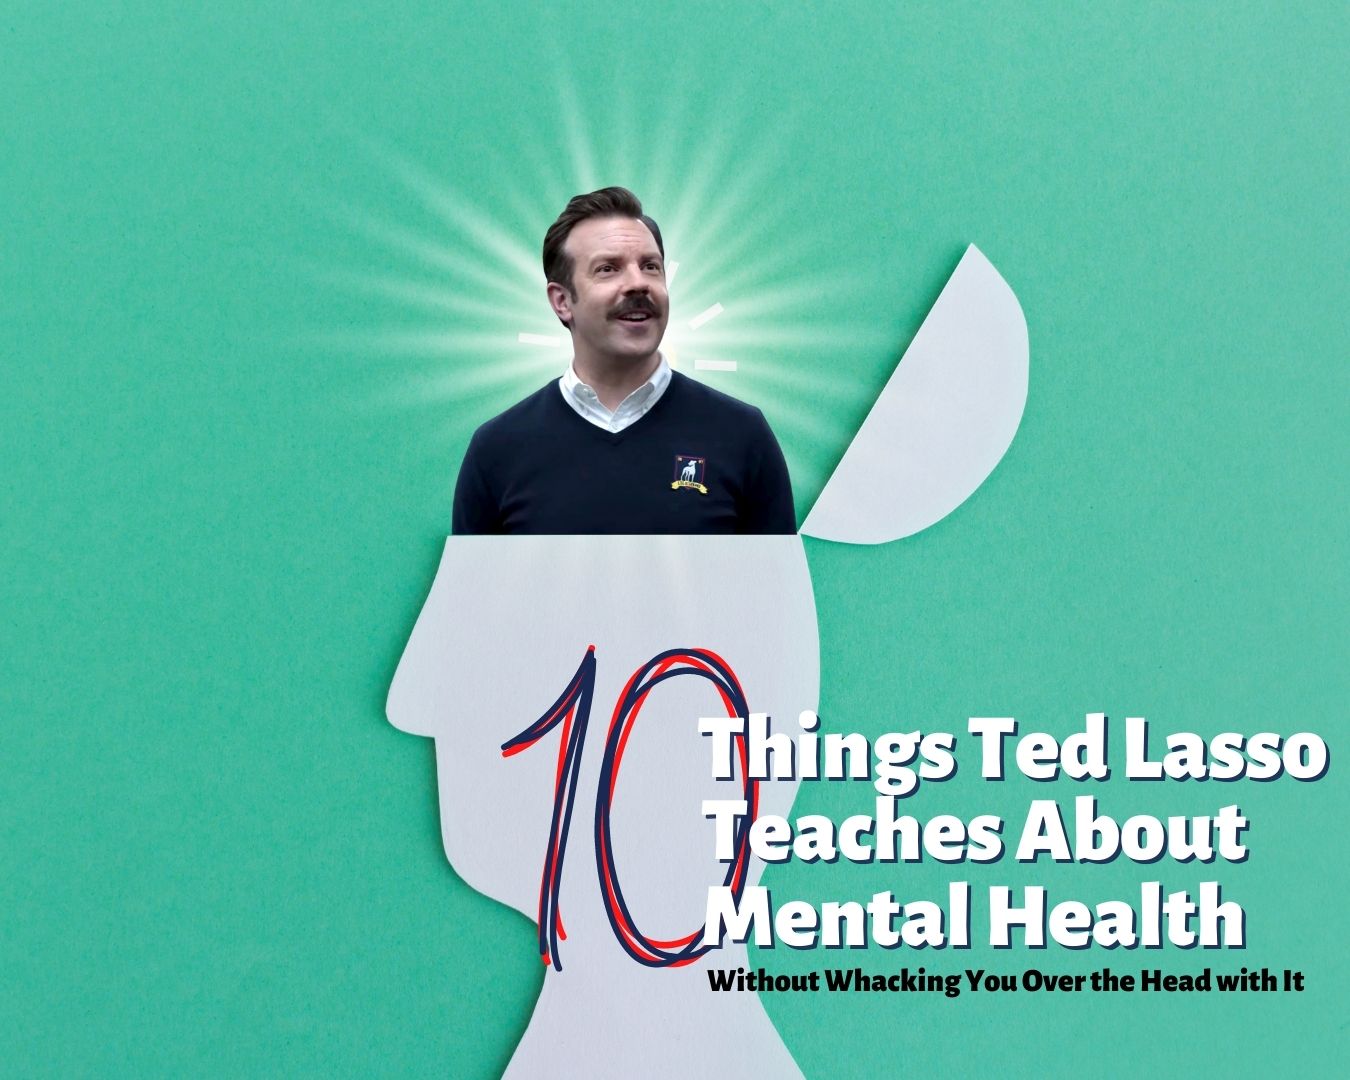 10 Things Ted Lasso Teaches About Mental Health Without Hitting You Over the Head With It